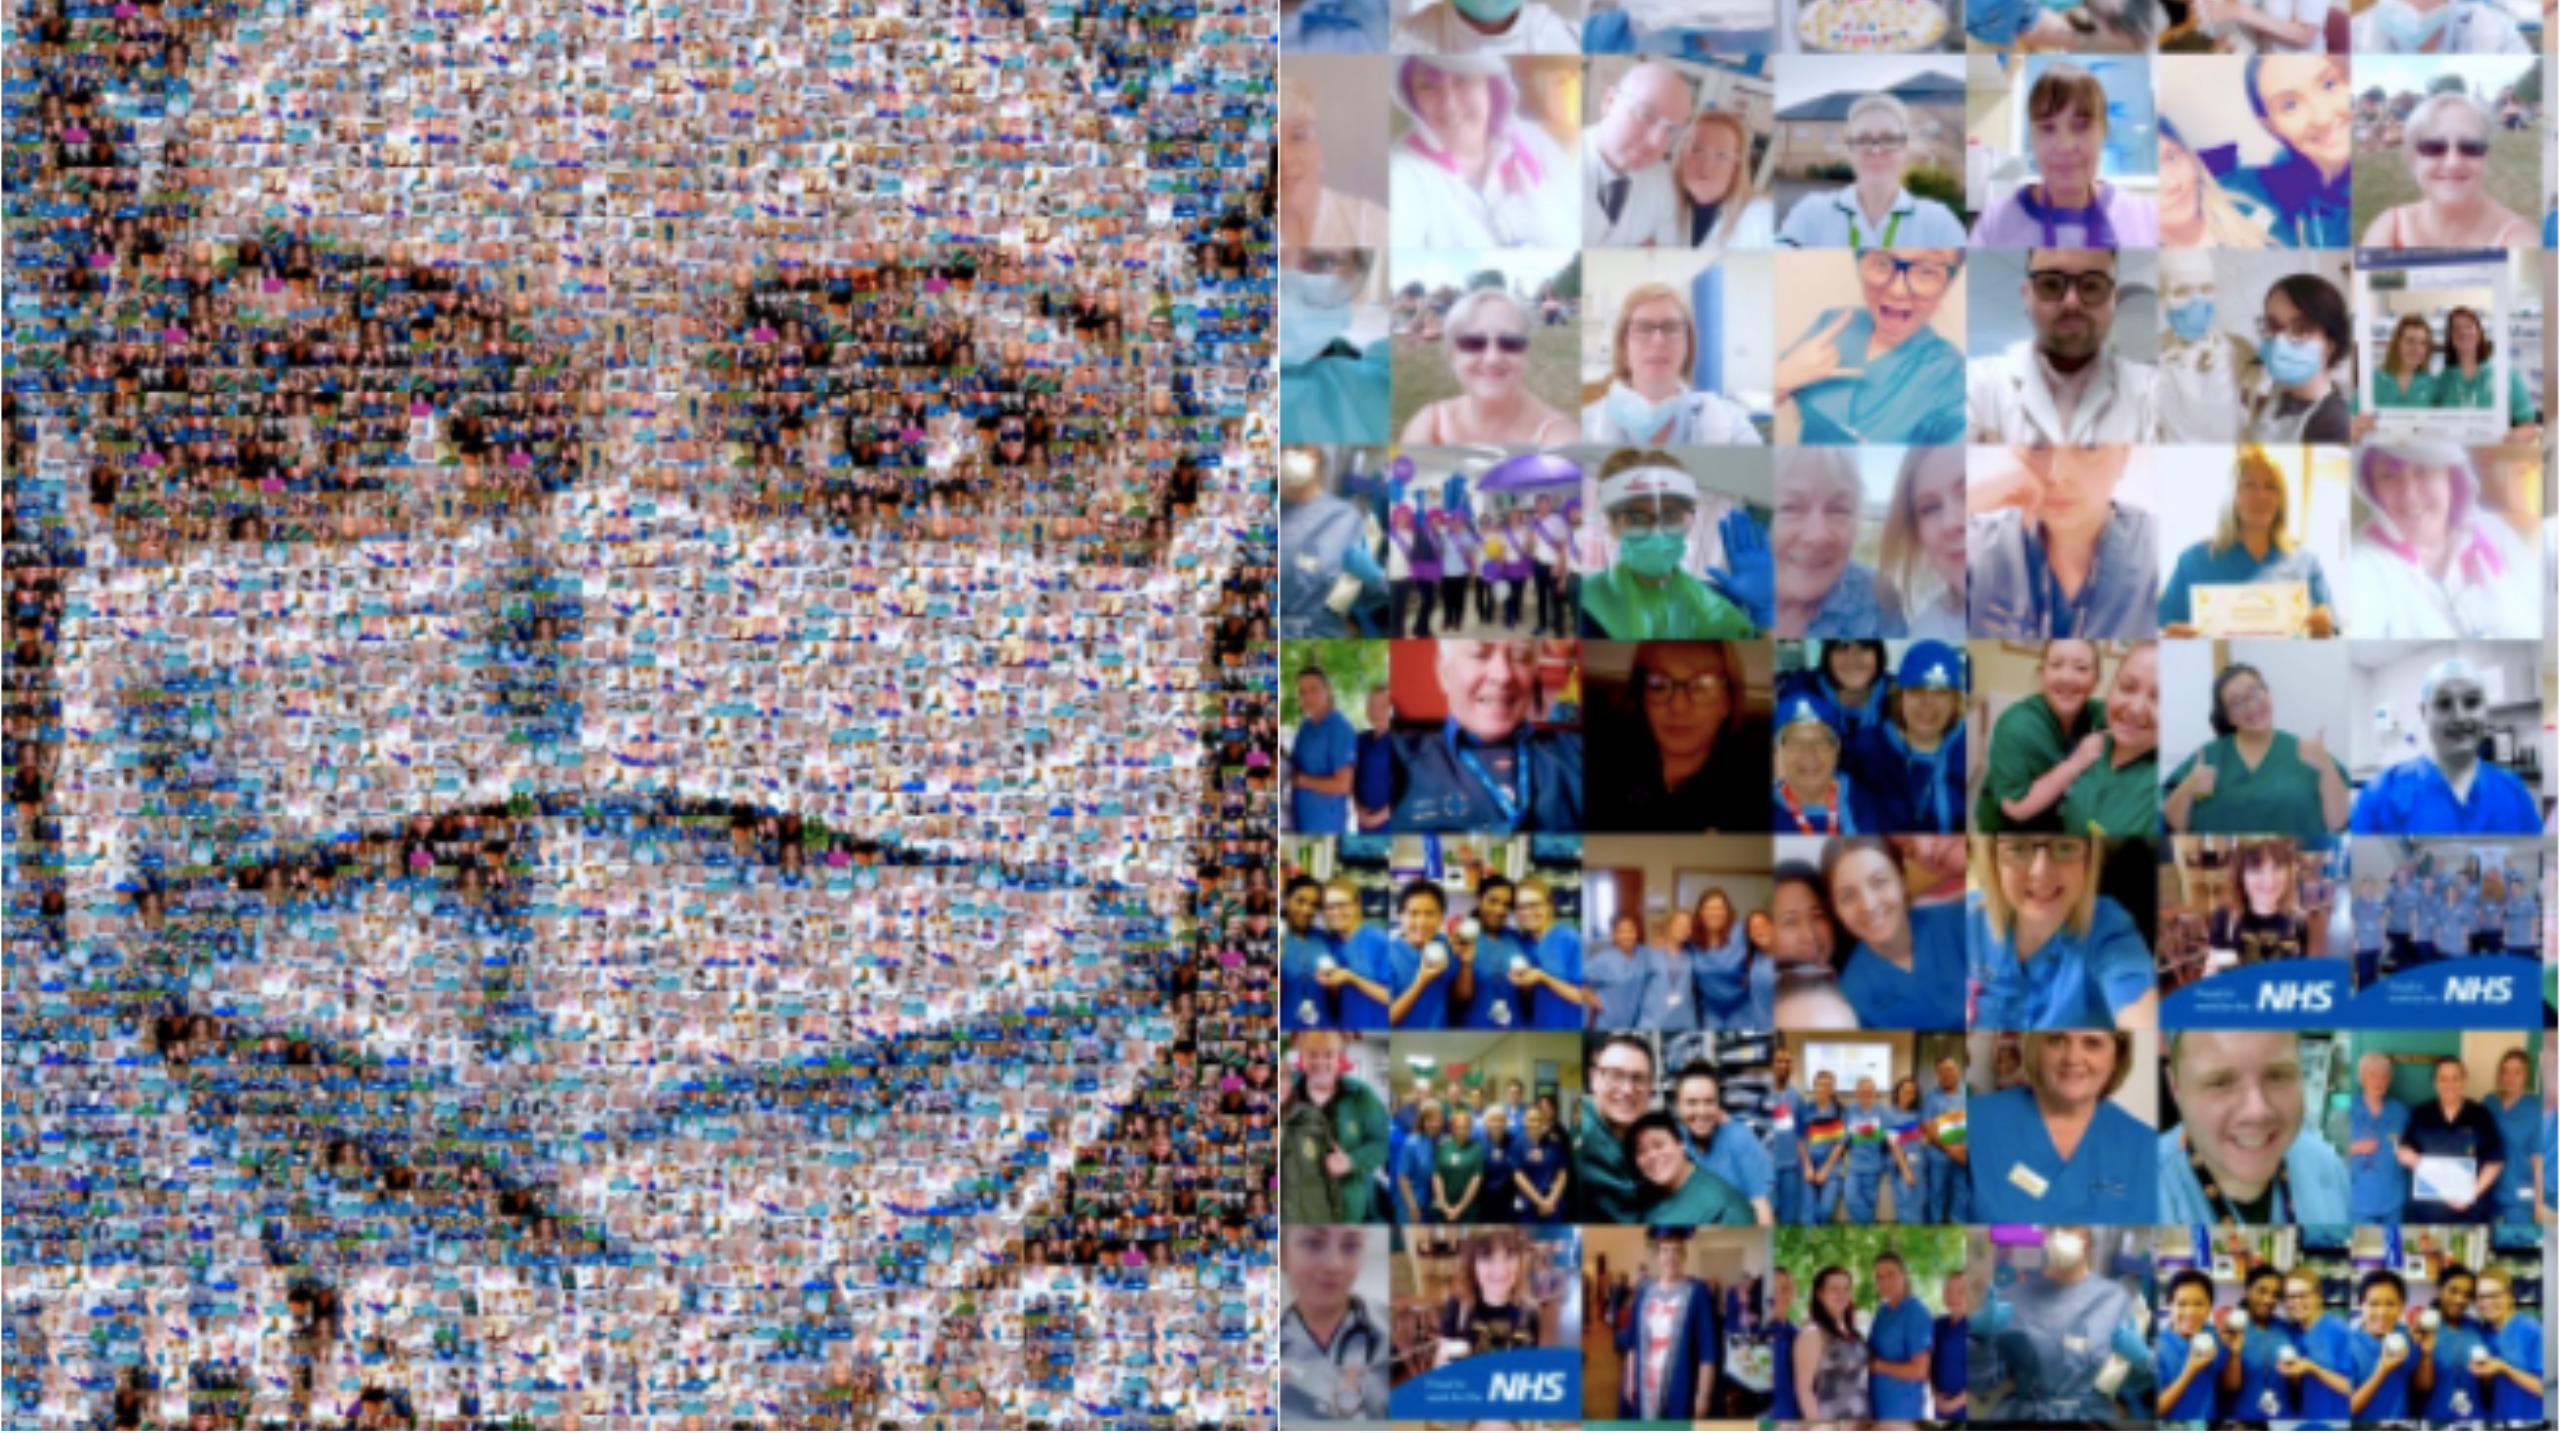 Artist Nathan Wyburn thanks NHS workers with photo collage tribute